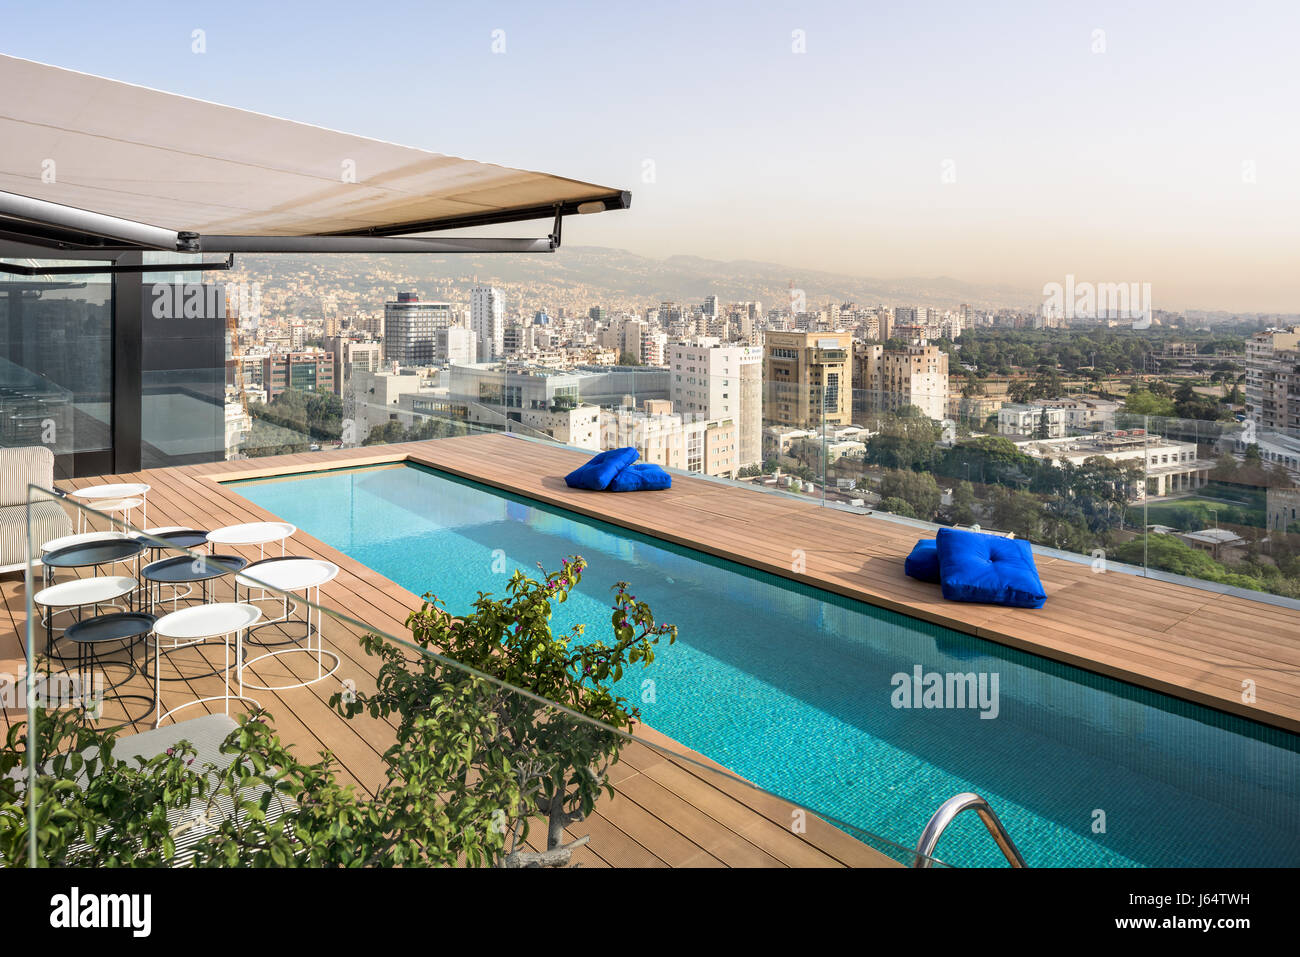 Roof top swimming pool with views of Beirut Stock Photo